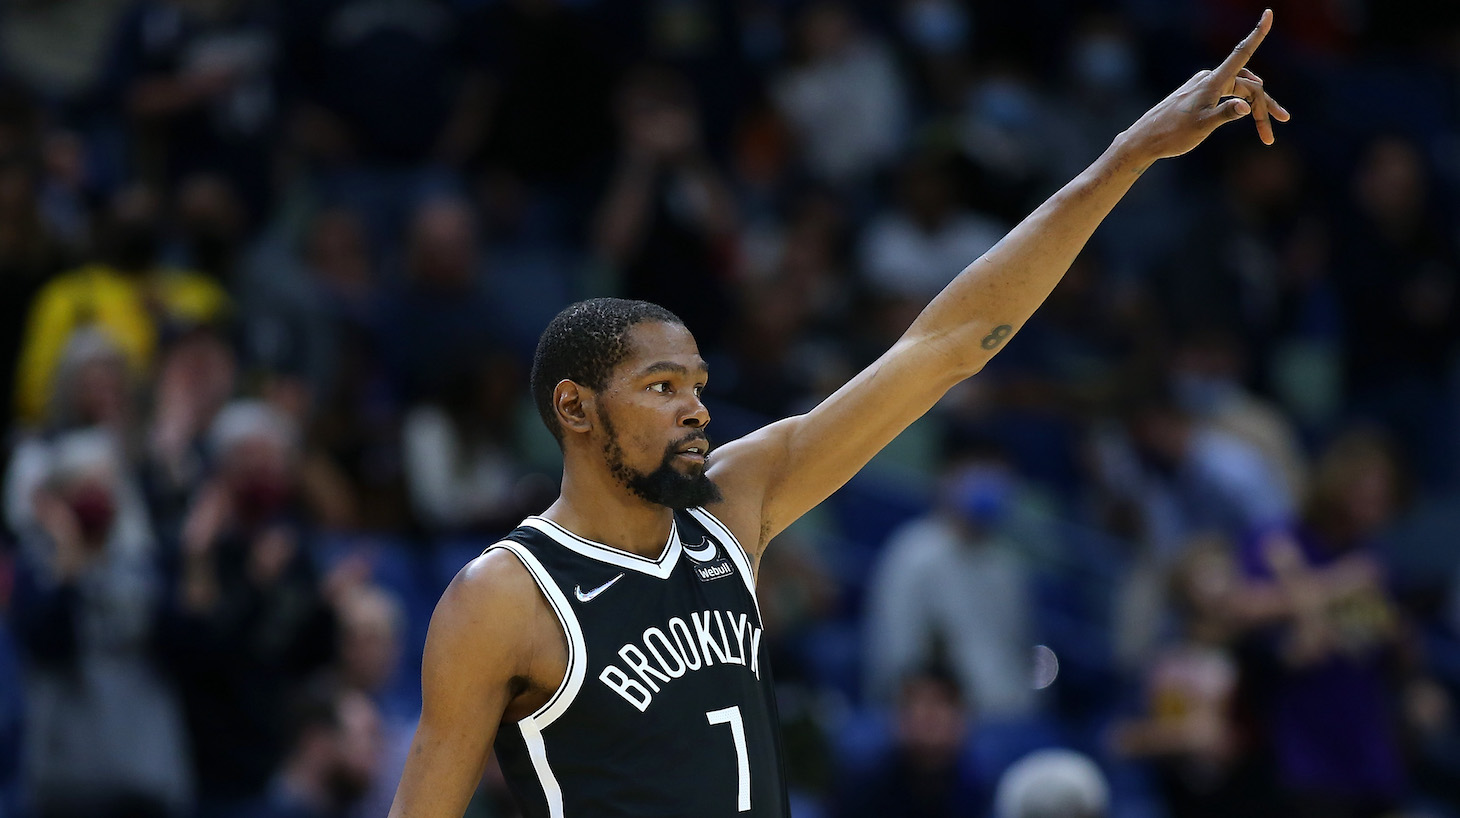 NEW ORLEANS, LOUISIANA - NOVEMBER 12: Kevin Durant #7 of the Brooklyn Nets reacts during the first half against the New Orleans Pelicans at the Smoothie King Center on November 12, 2021 in New Orleans, Louisiana. NOTE TO USER: User expressly acknowledges and agrees that, by downloading and or using this Photograph, user is consenting to the terms and conditions of the Getty Images License Agreement. (Photo by Jonathan Bachman/Getty Images)